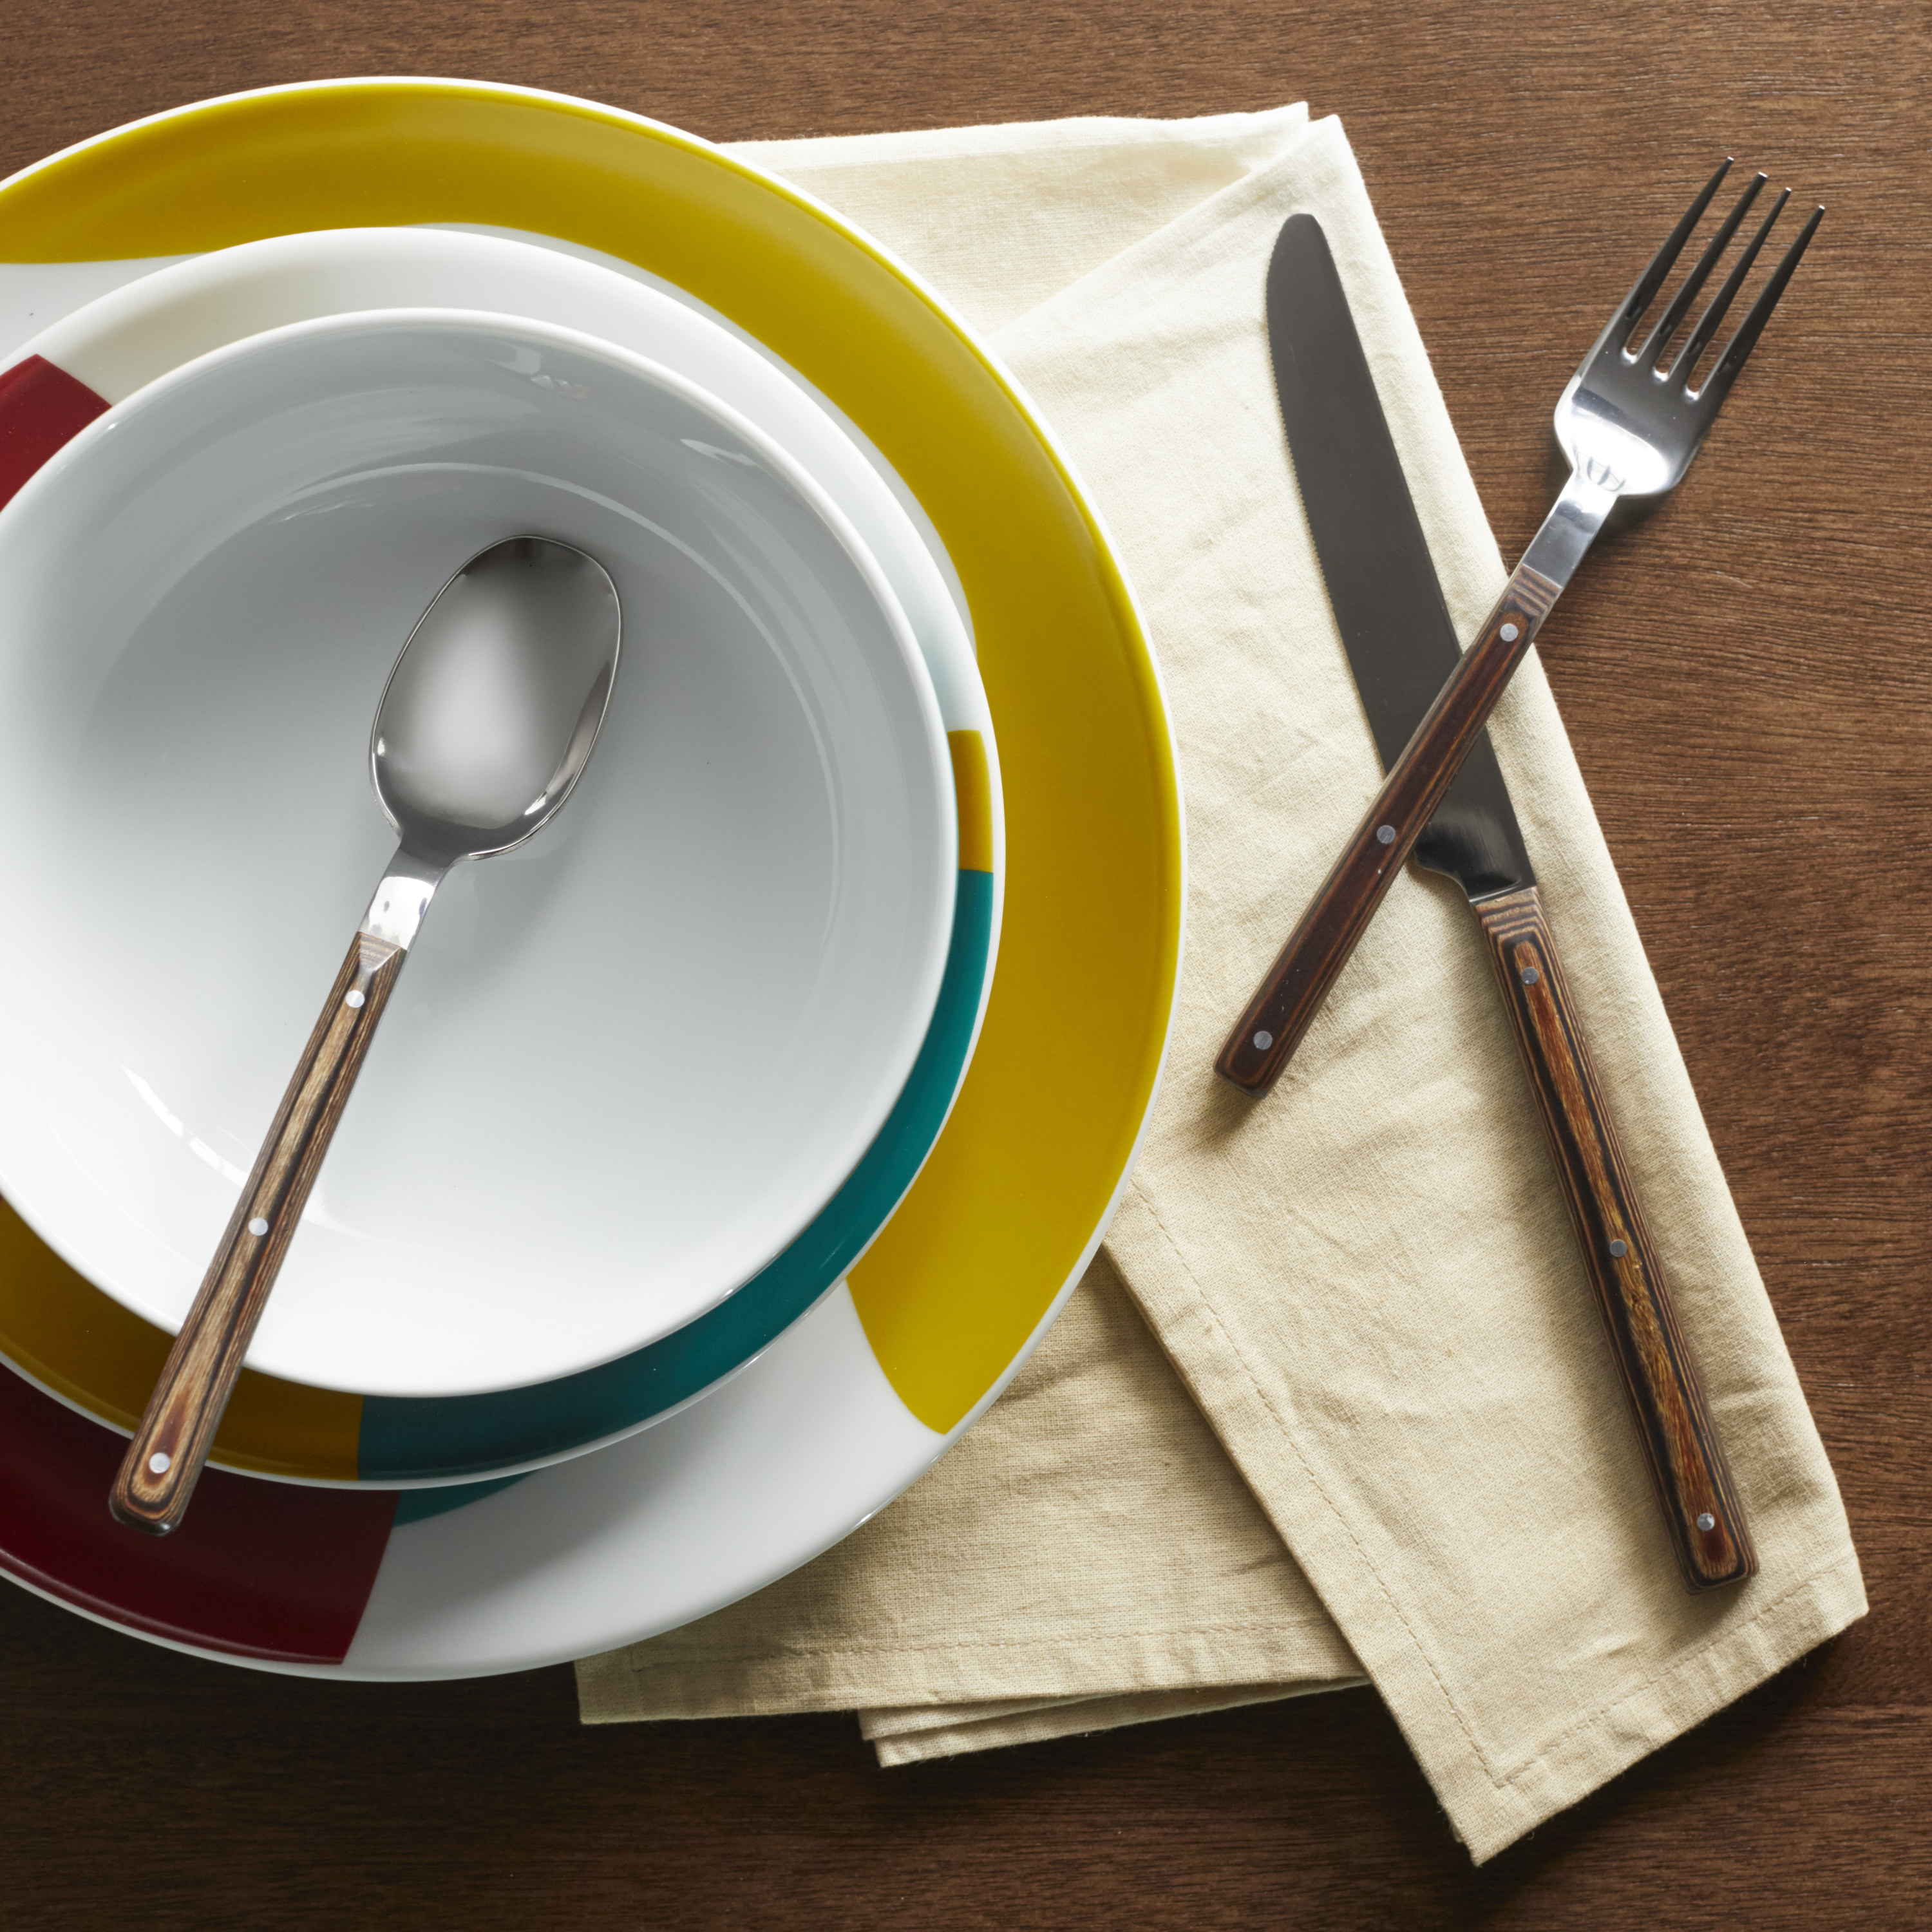 The flatware on a brightly colored dinnerware set